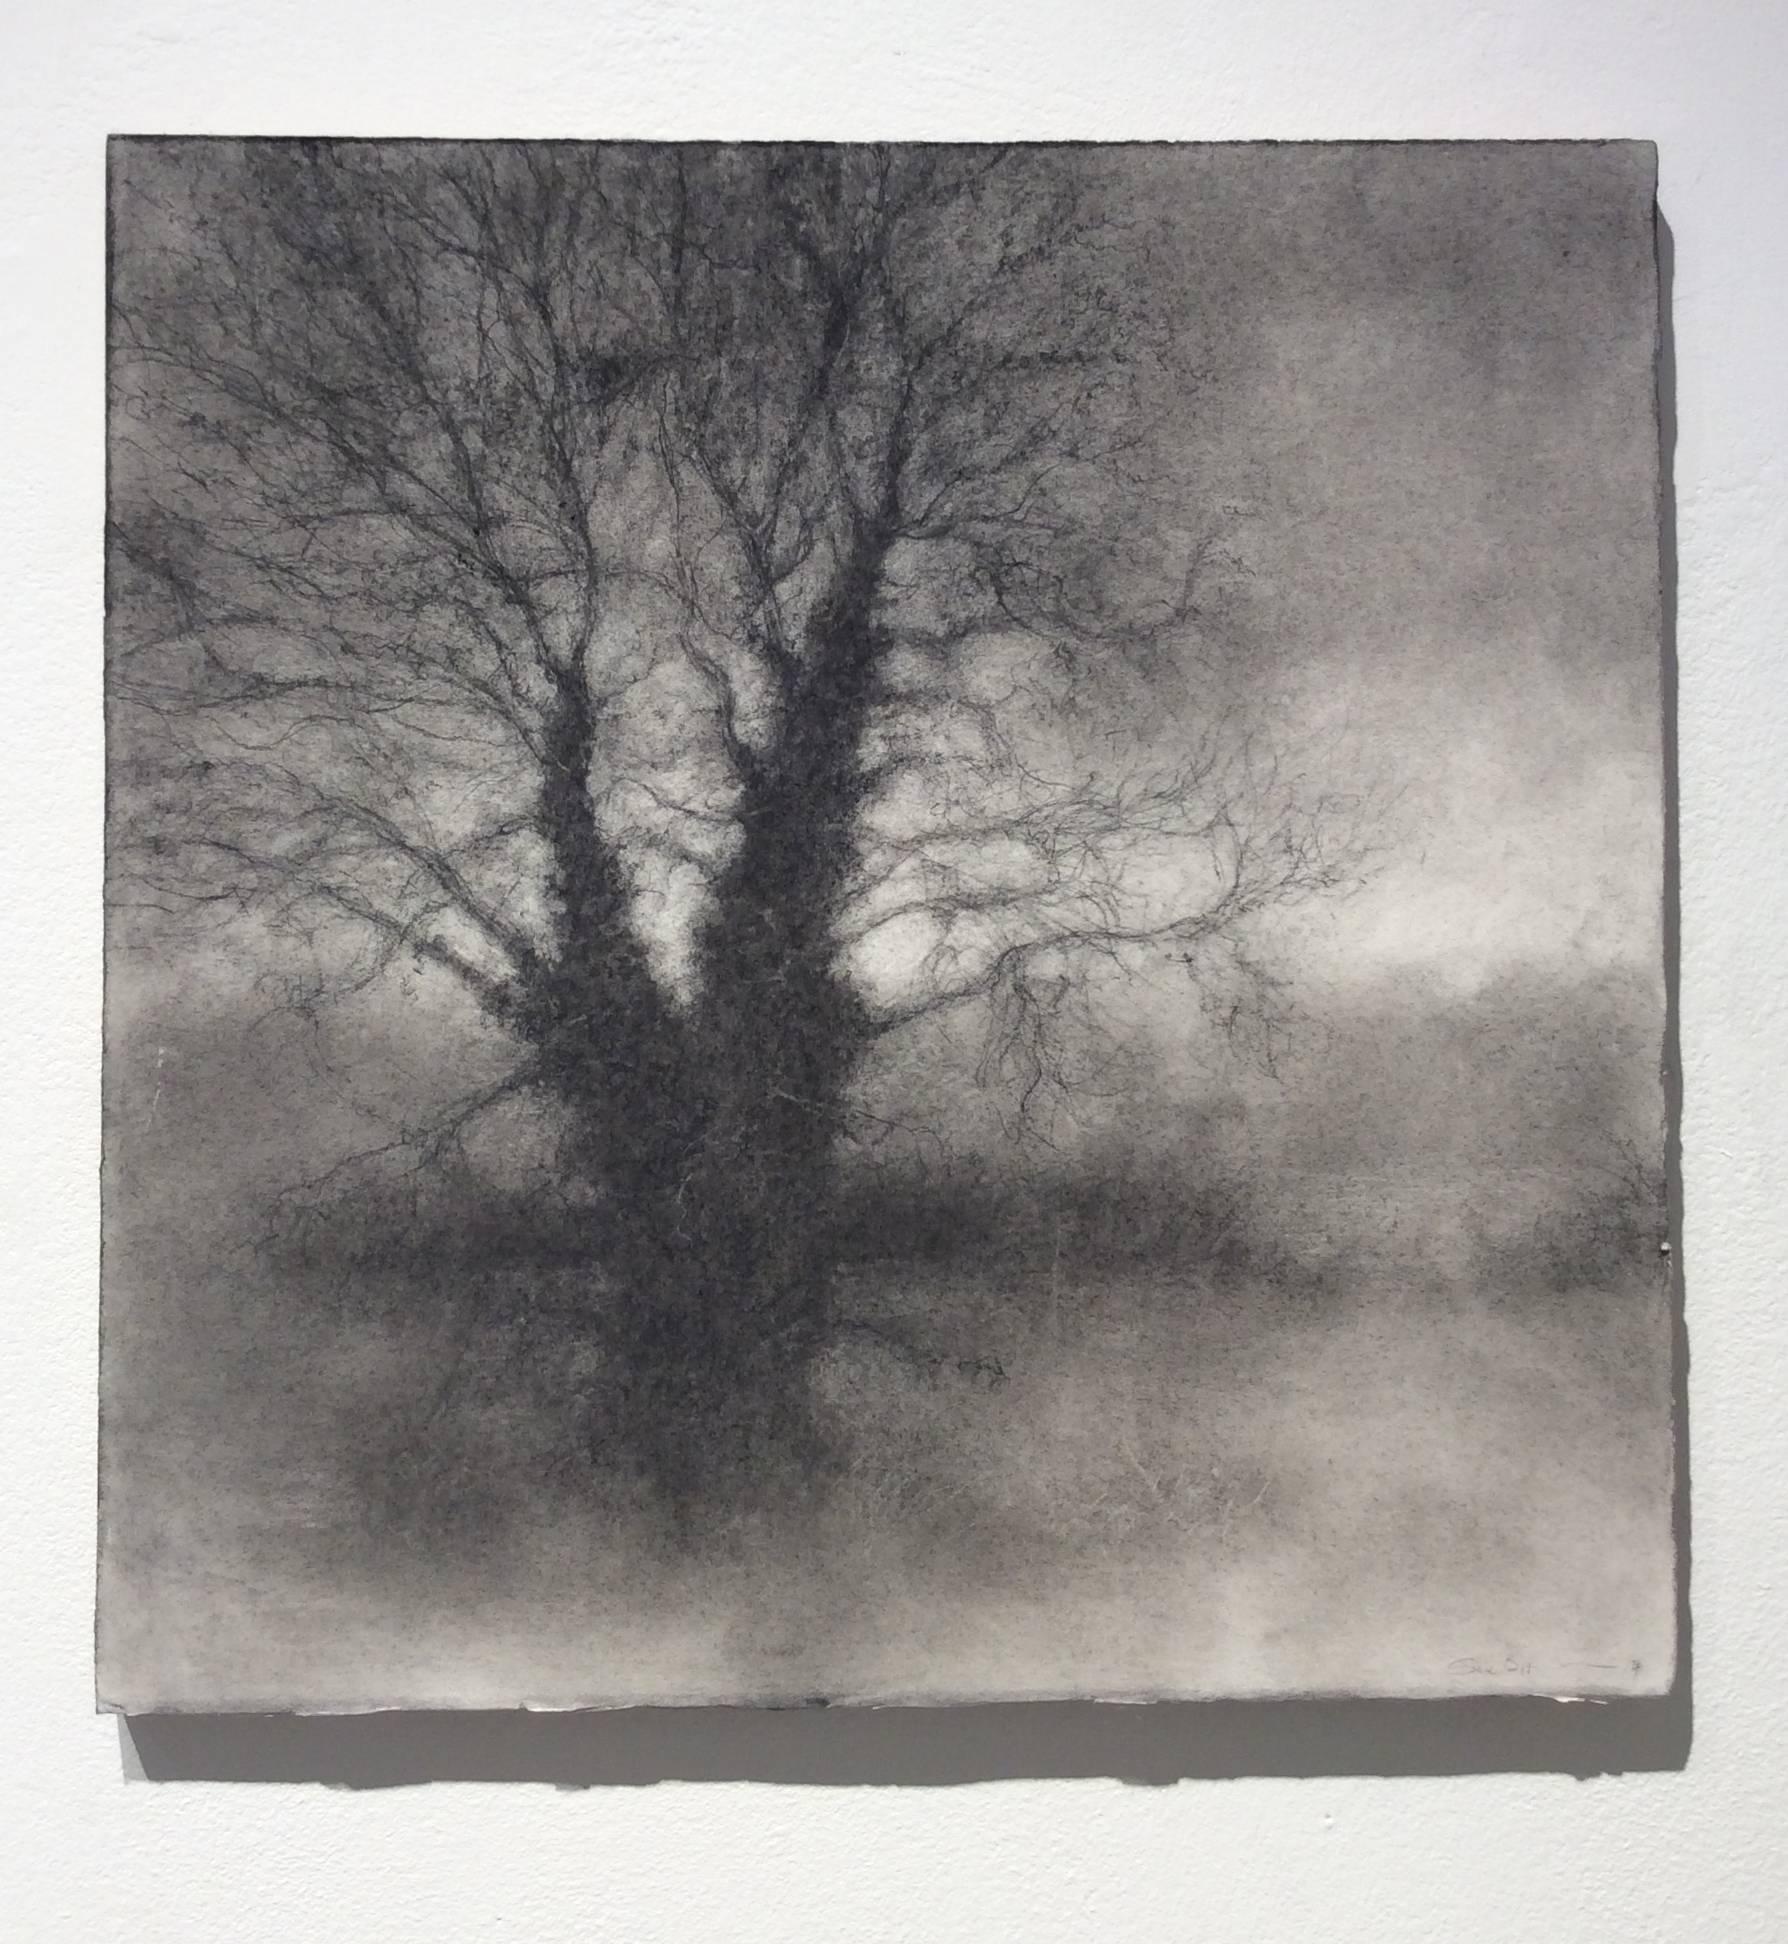 Winter Tree 4 (Black & White Realistic Landscape Charcoal Drawing on Paper) - Art by Sue Bryan